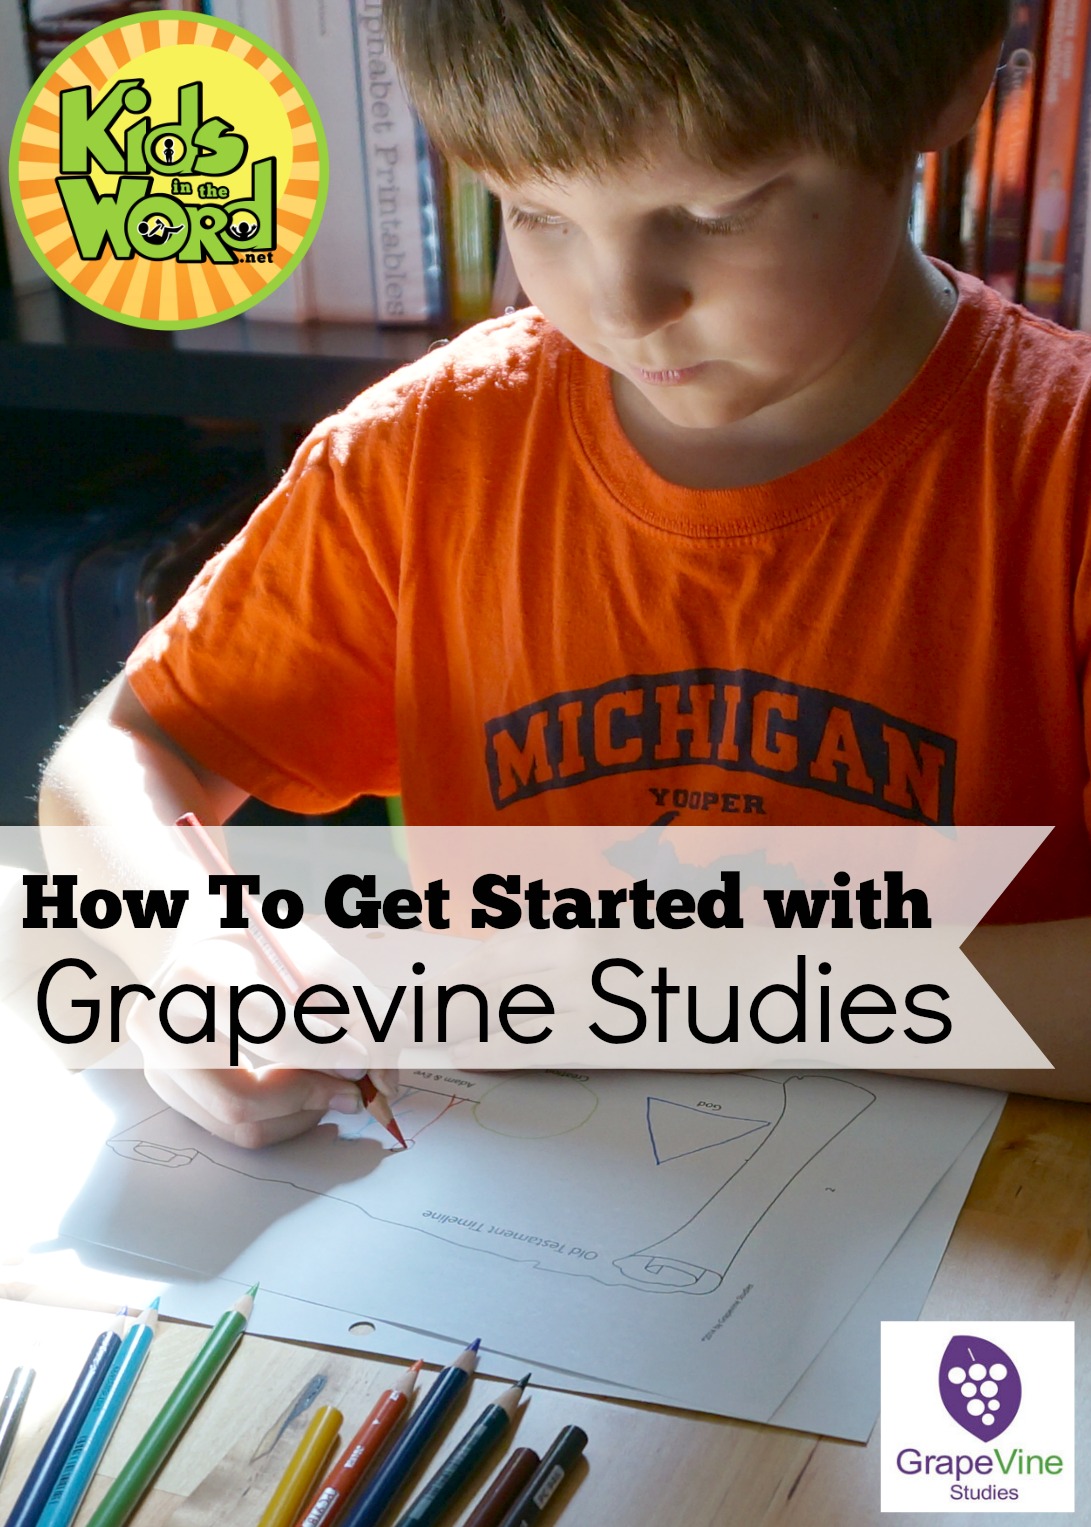 How to Get Started with Grapevine Studies: Picking studies and teaching multiple ages.